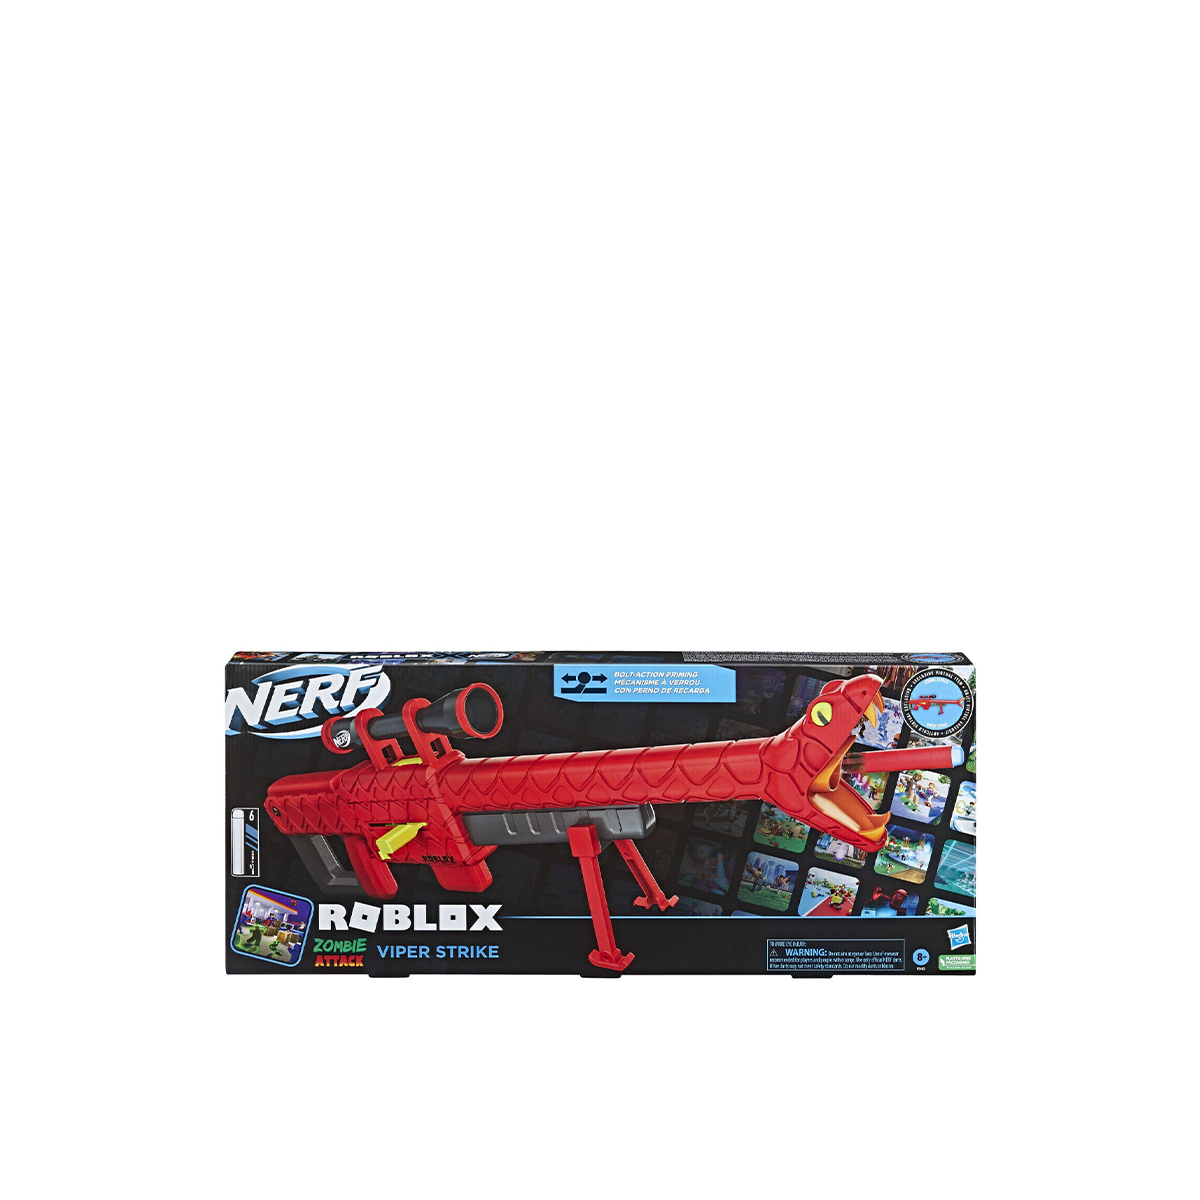 Nerf Roblox Zombie Attack Viper Strike Blaster, Toy Blasters & Soakers